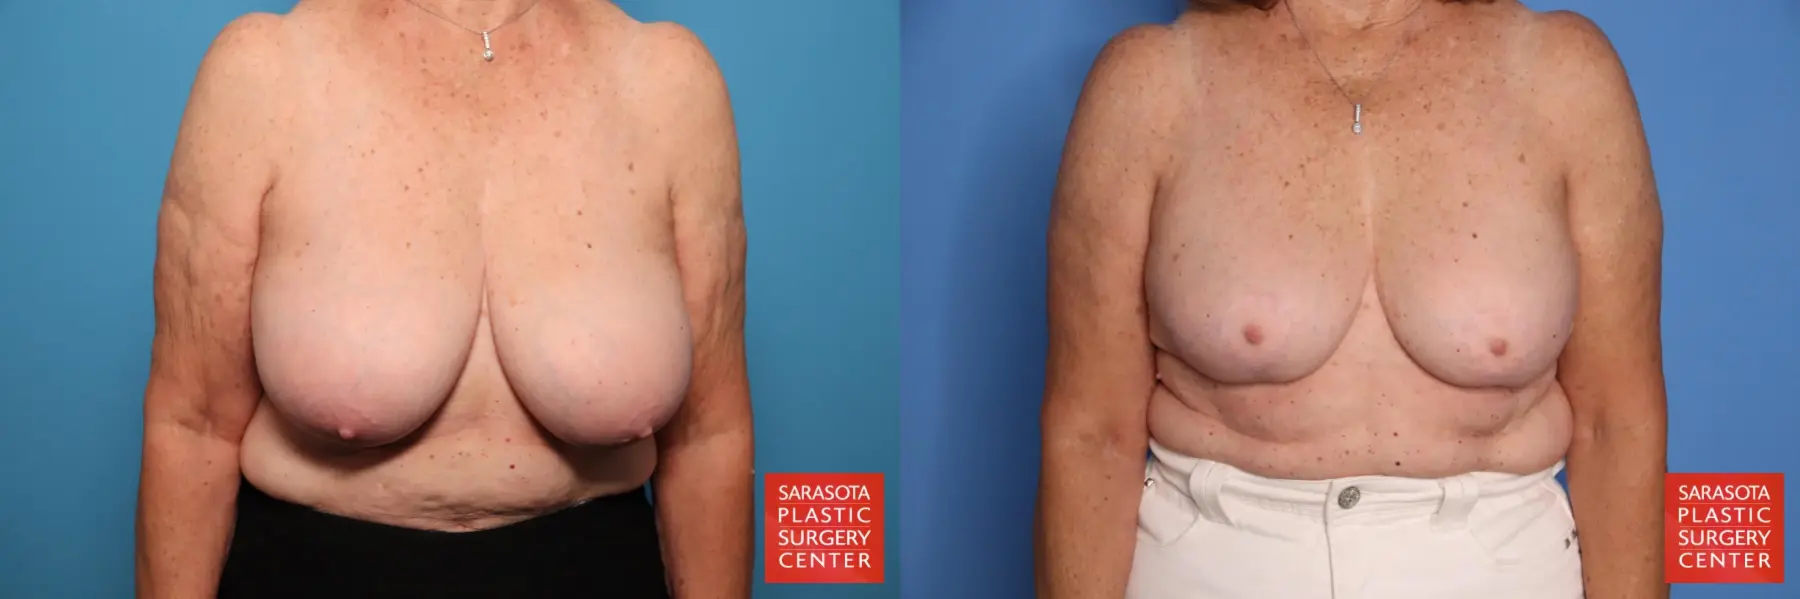 Breast Reduction: Patient 3 - Before and After 1